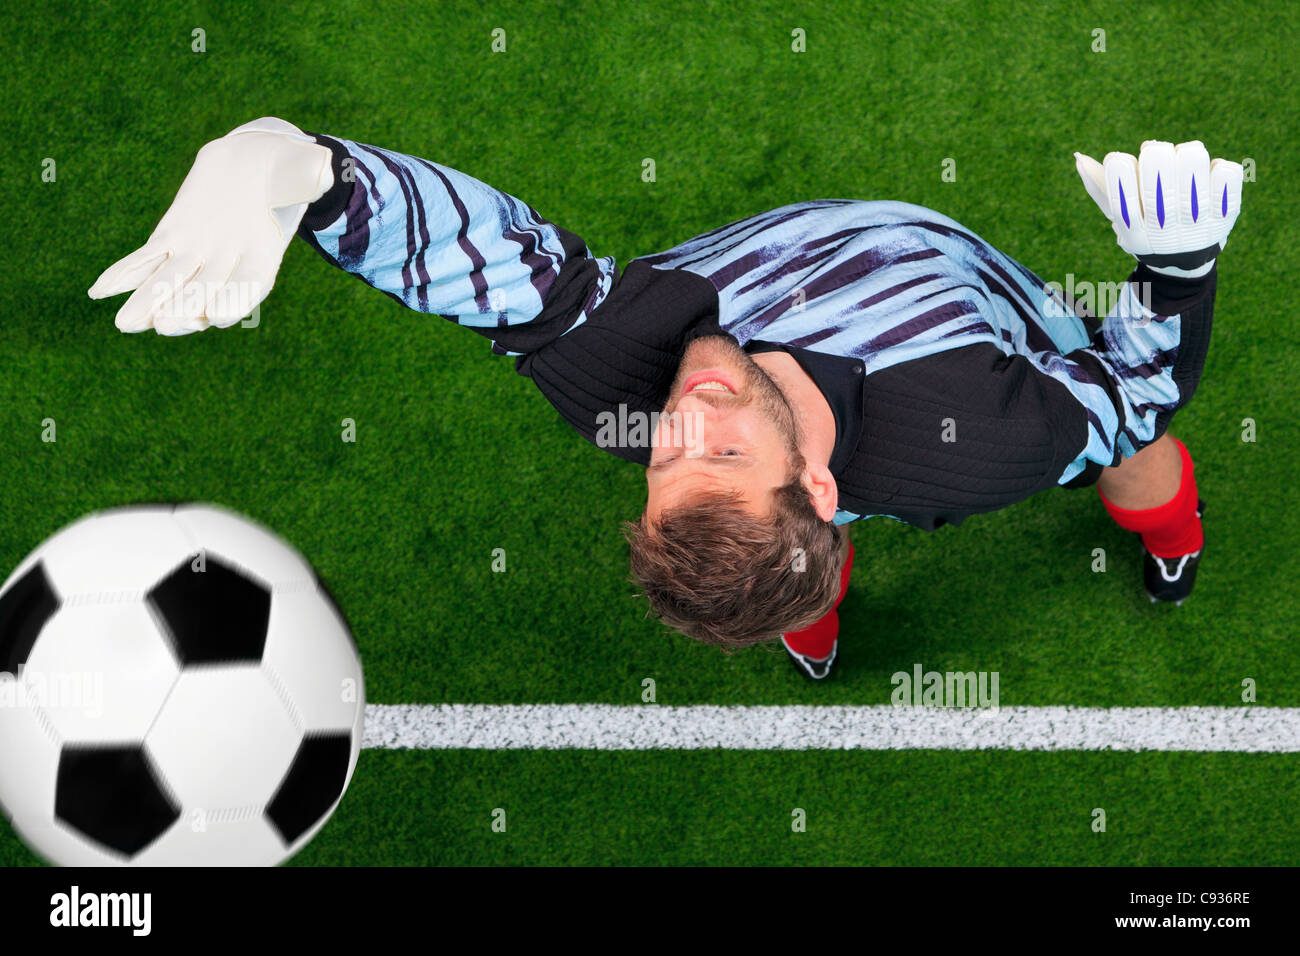 Overhead photo of a football goalkeeper missing saving the ball as it crosses over the line. Stock Photo